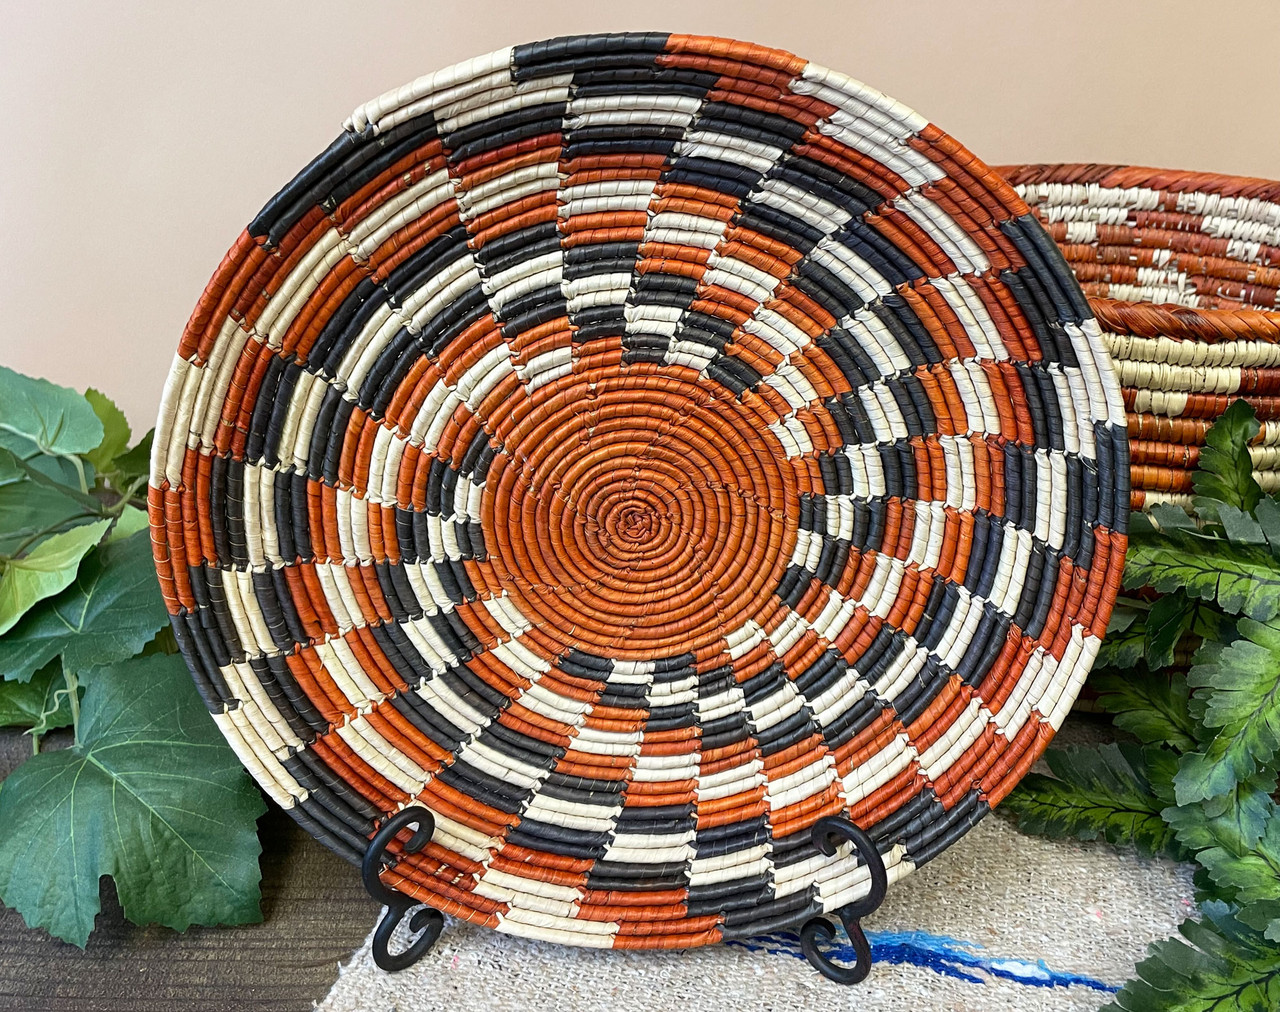 Hand Coiled Basket & Stand 12.25 (b6) - Mission Del Rey Southwest